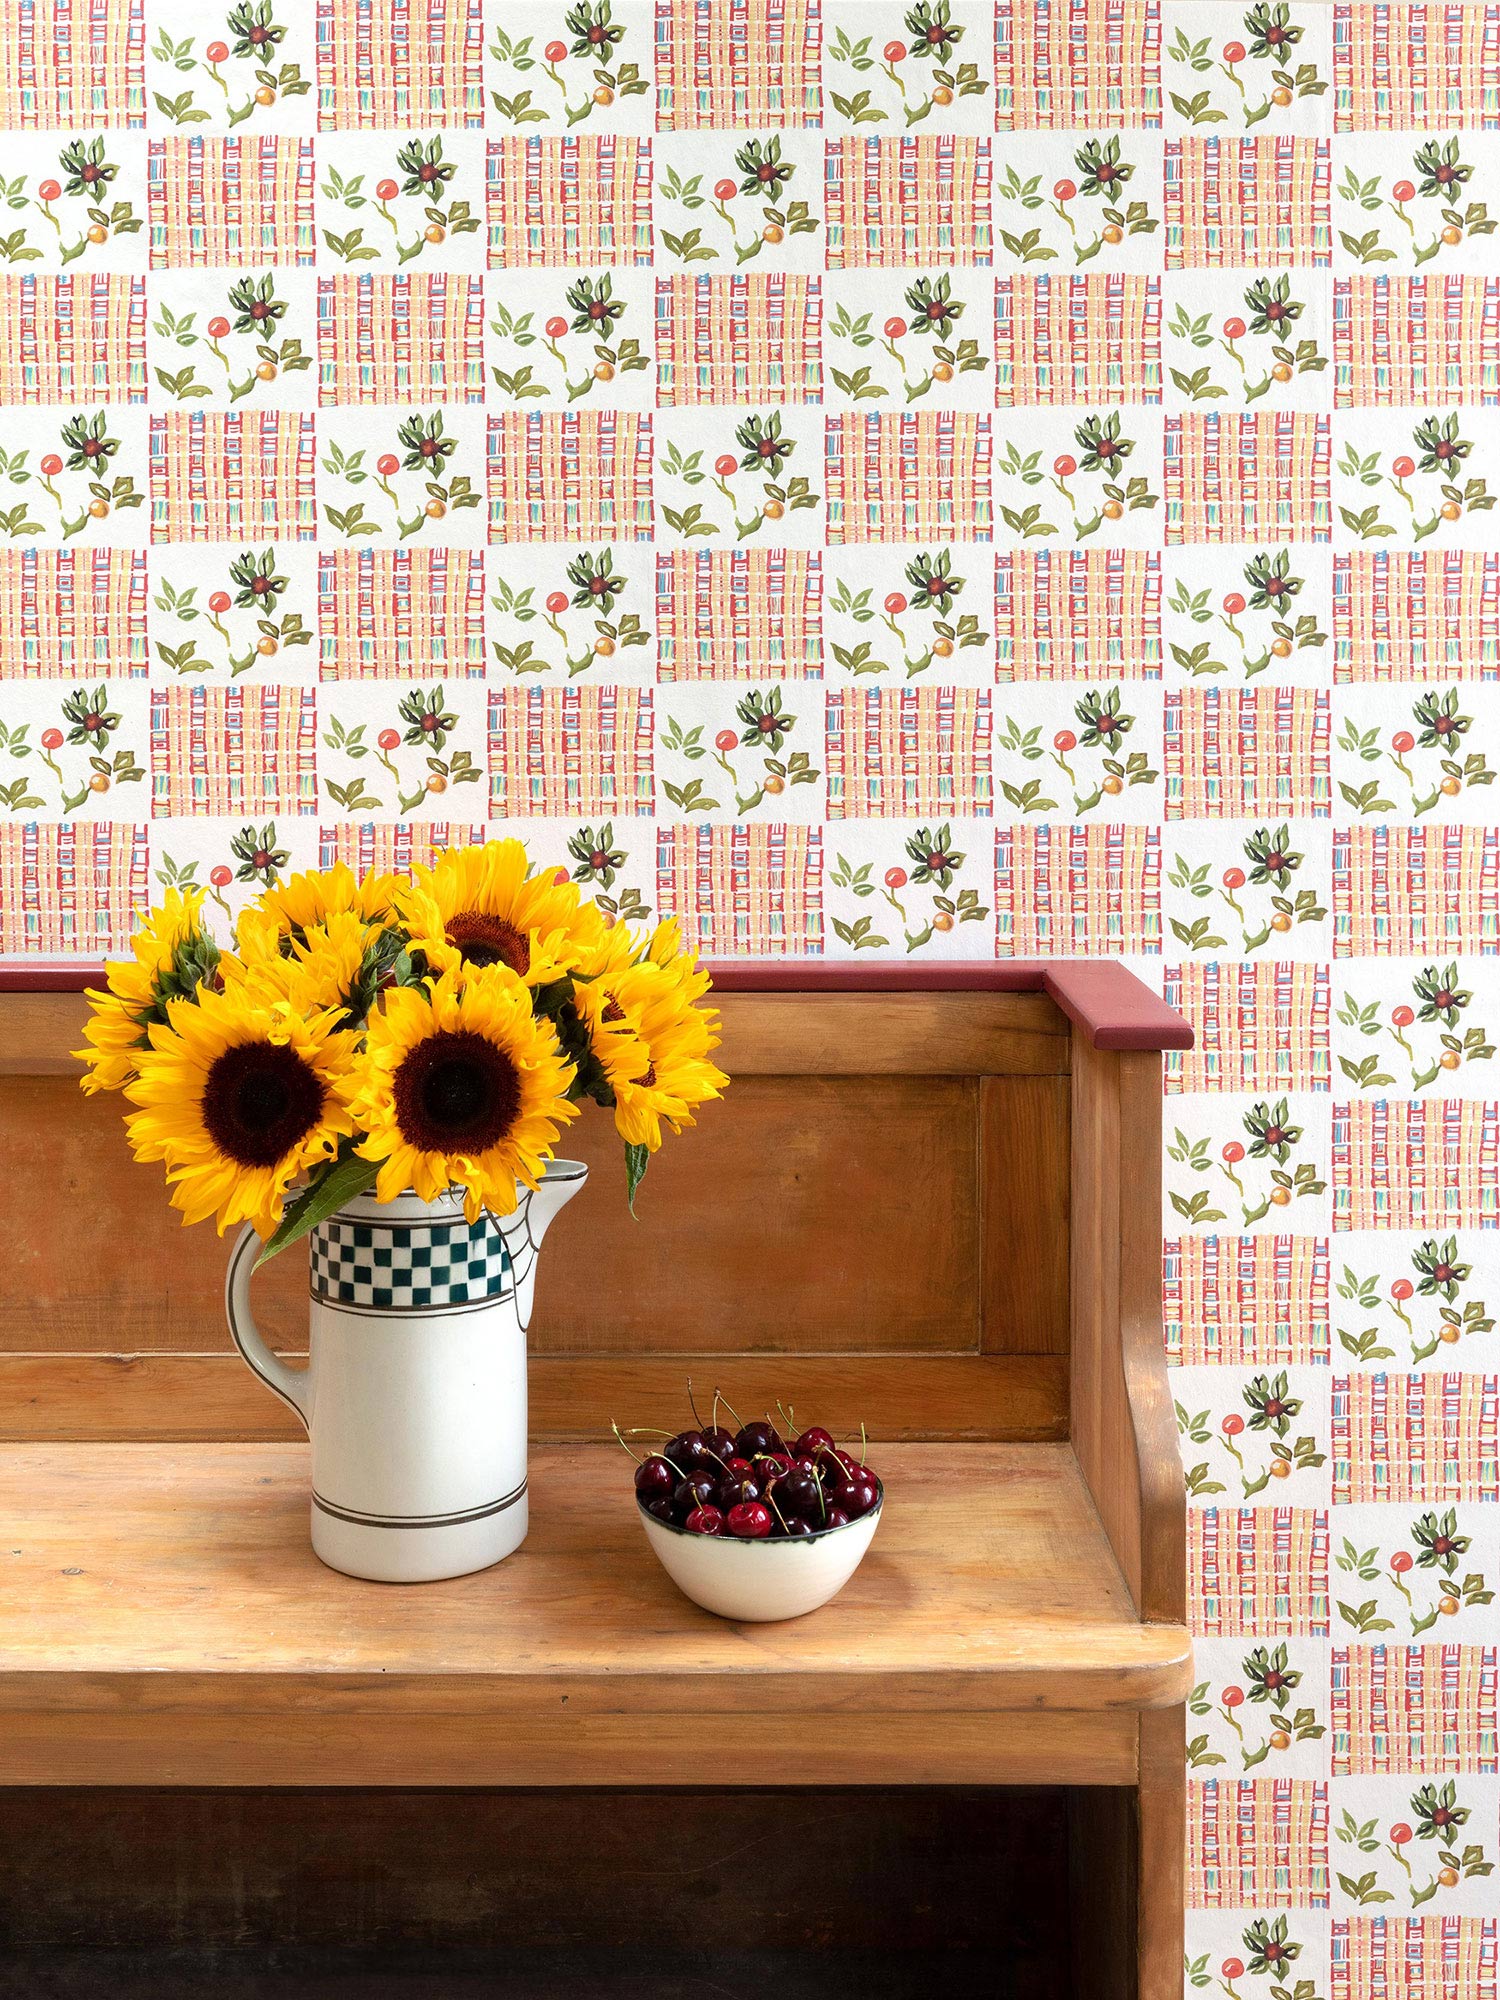 White chequerboard wallpaper combining Arts & Crafts with West African textiles, with a detail from a William Morris wall hanging, pictured with cherries and sunflowers on a bench